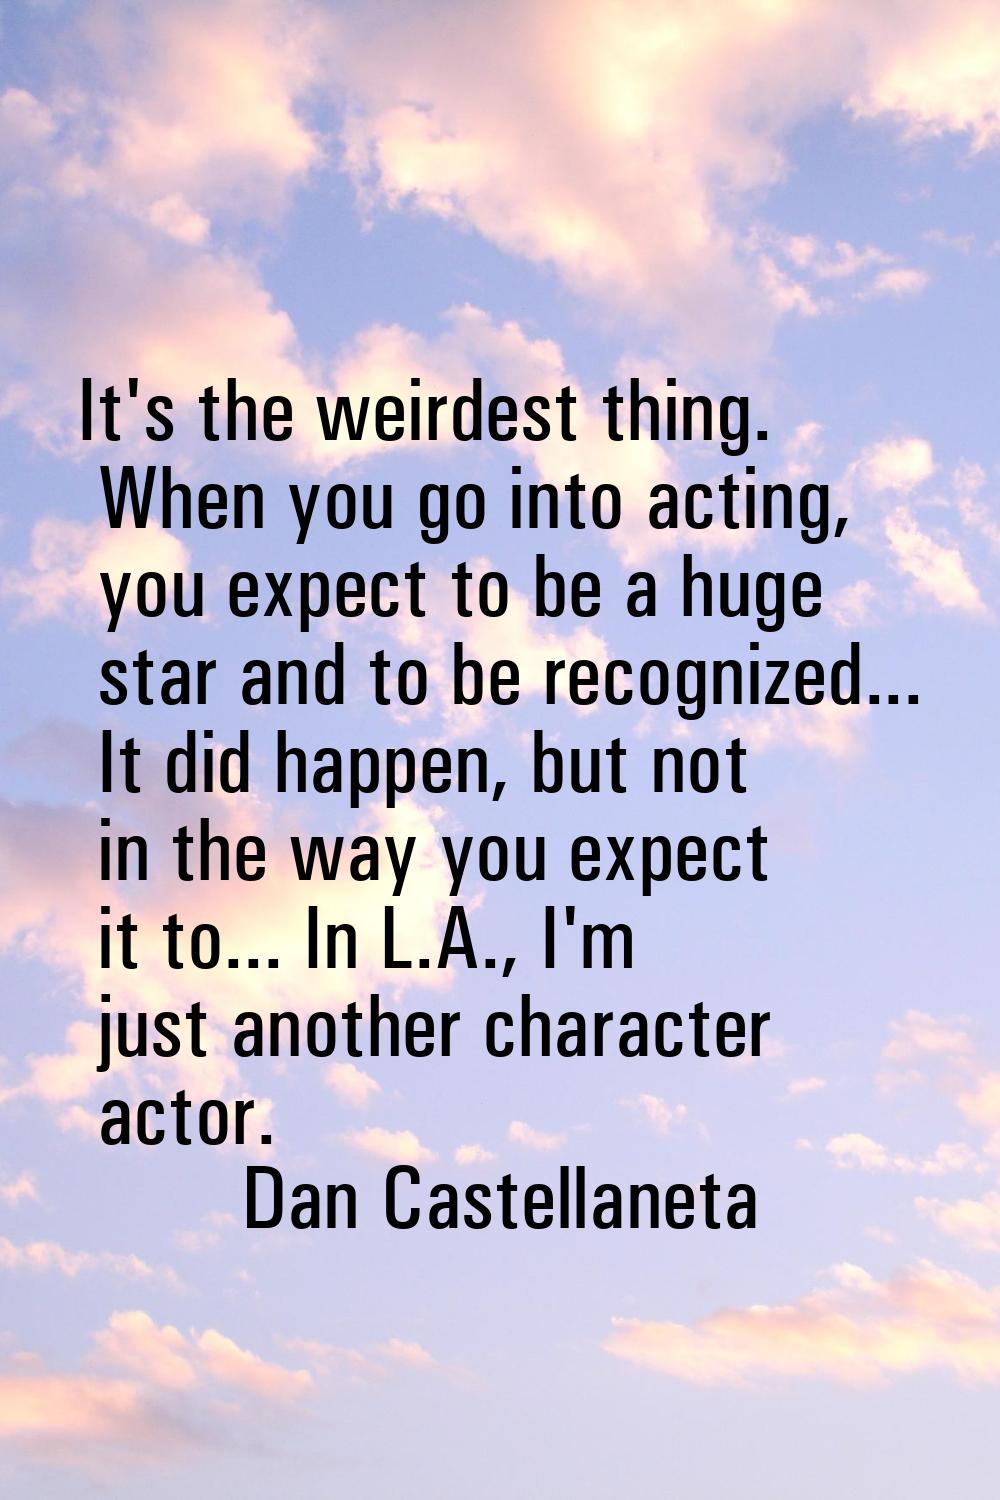 It's the weirdest thing. When you go into acting, you expect to be a huge star and to be recognized